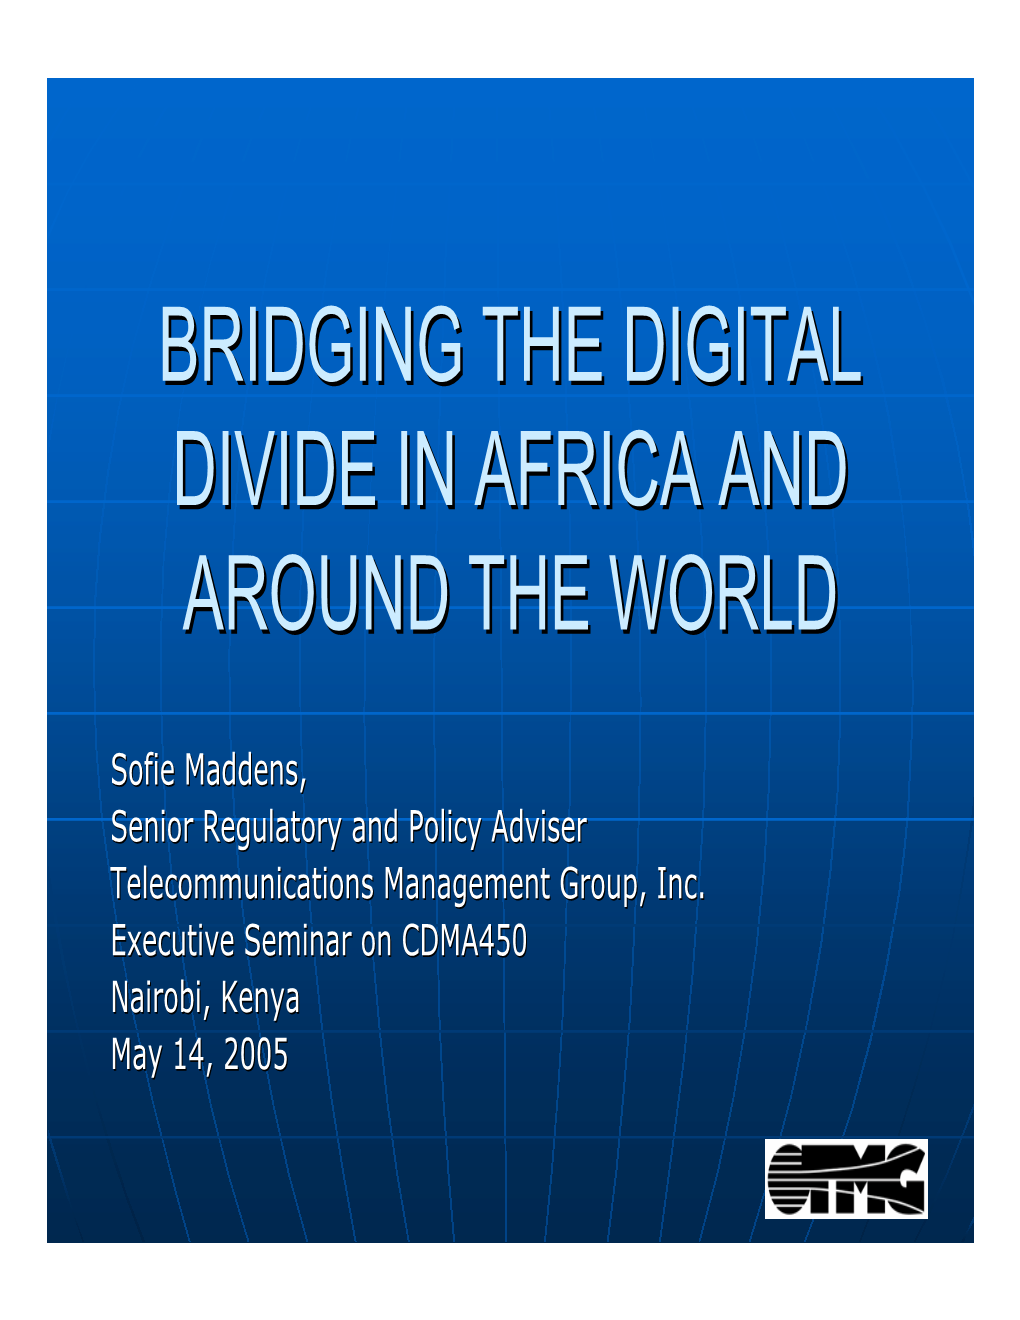 Bridging the Digital Divide in Africa and Around the World